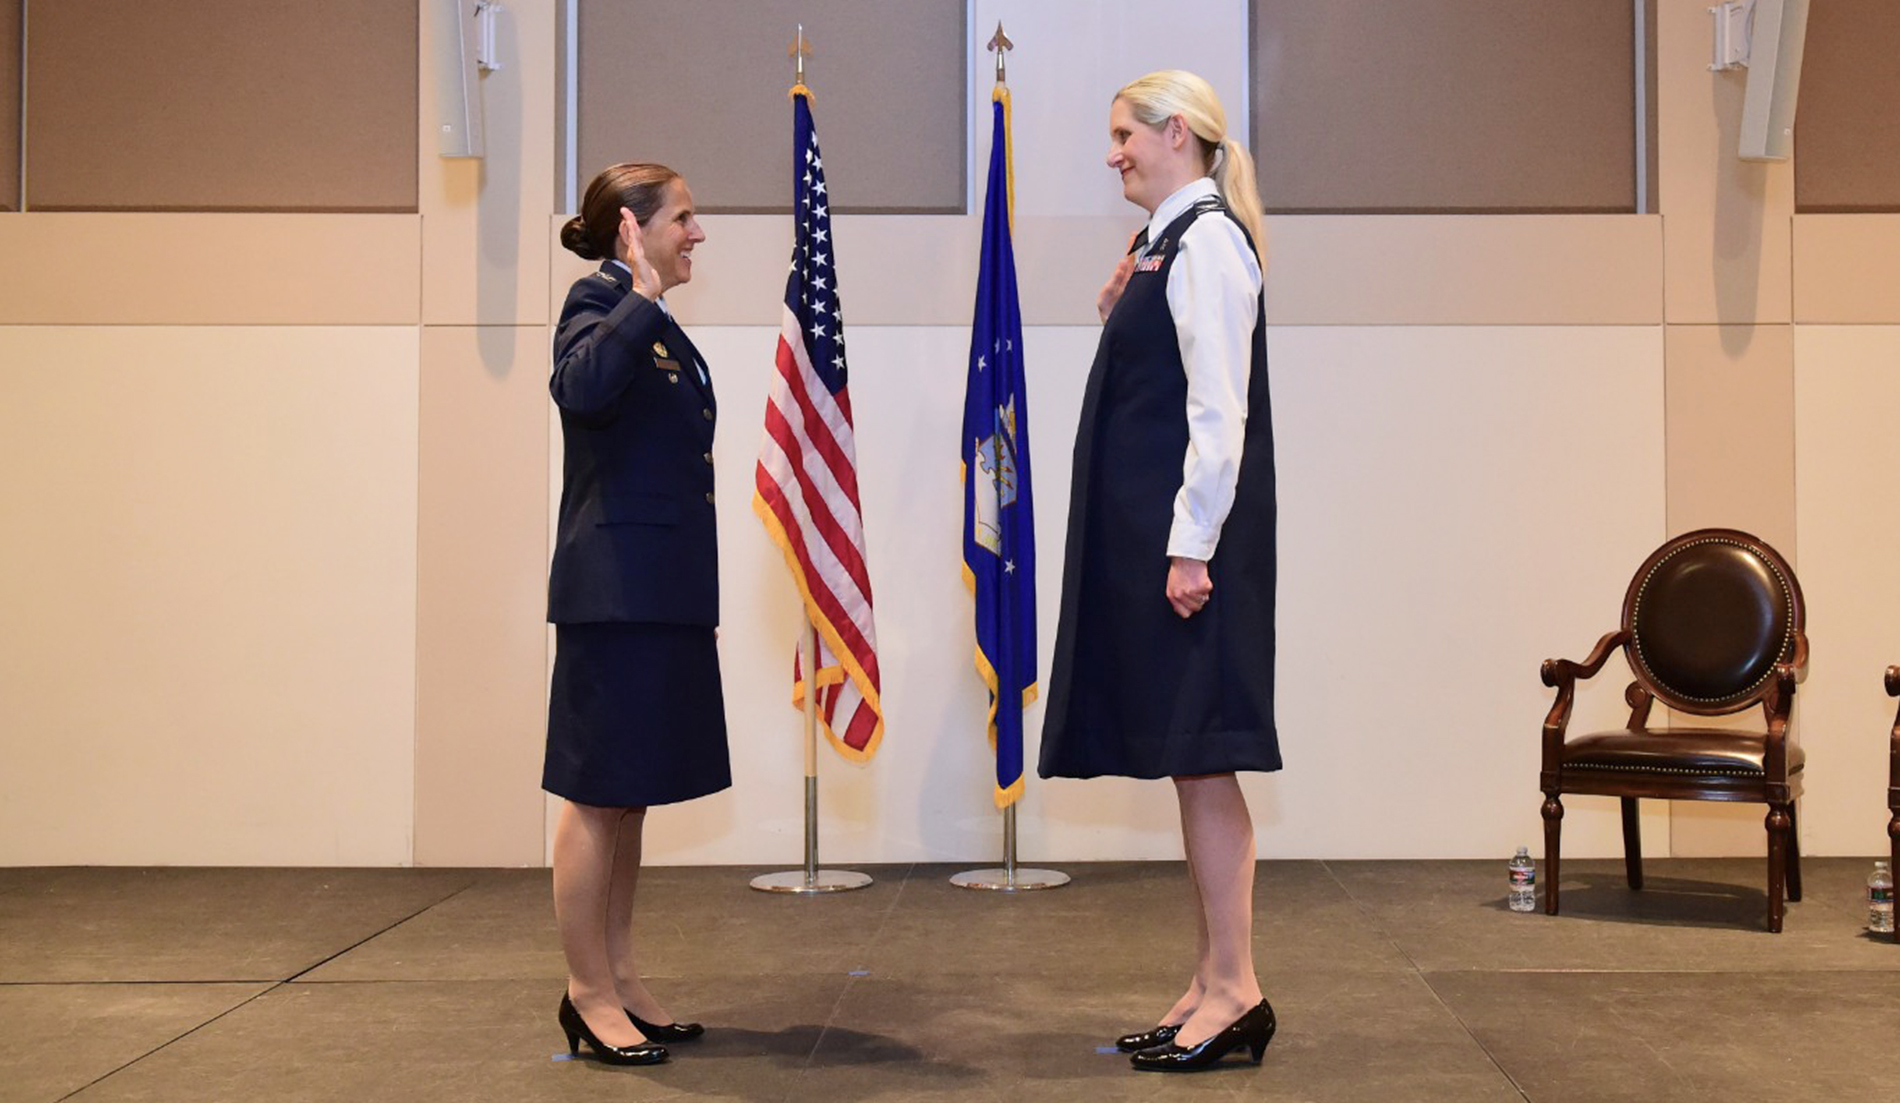 Two people perform a military promotion ceremony while facing each other indoors.